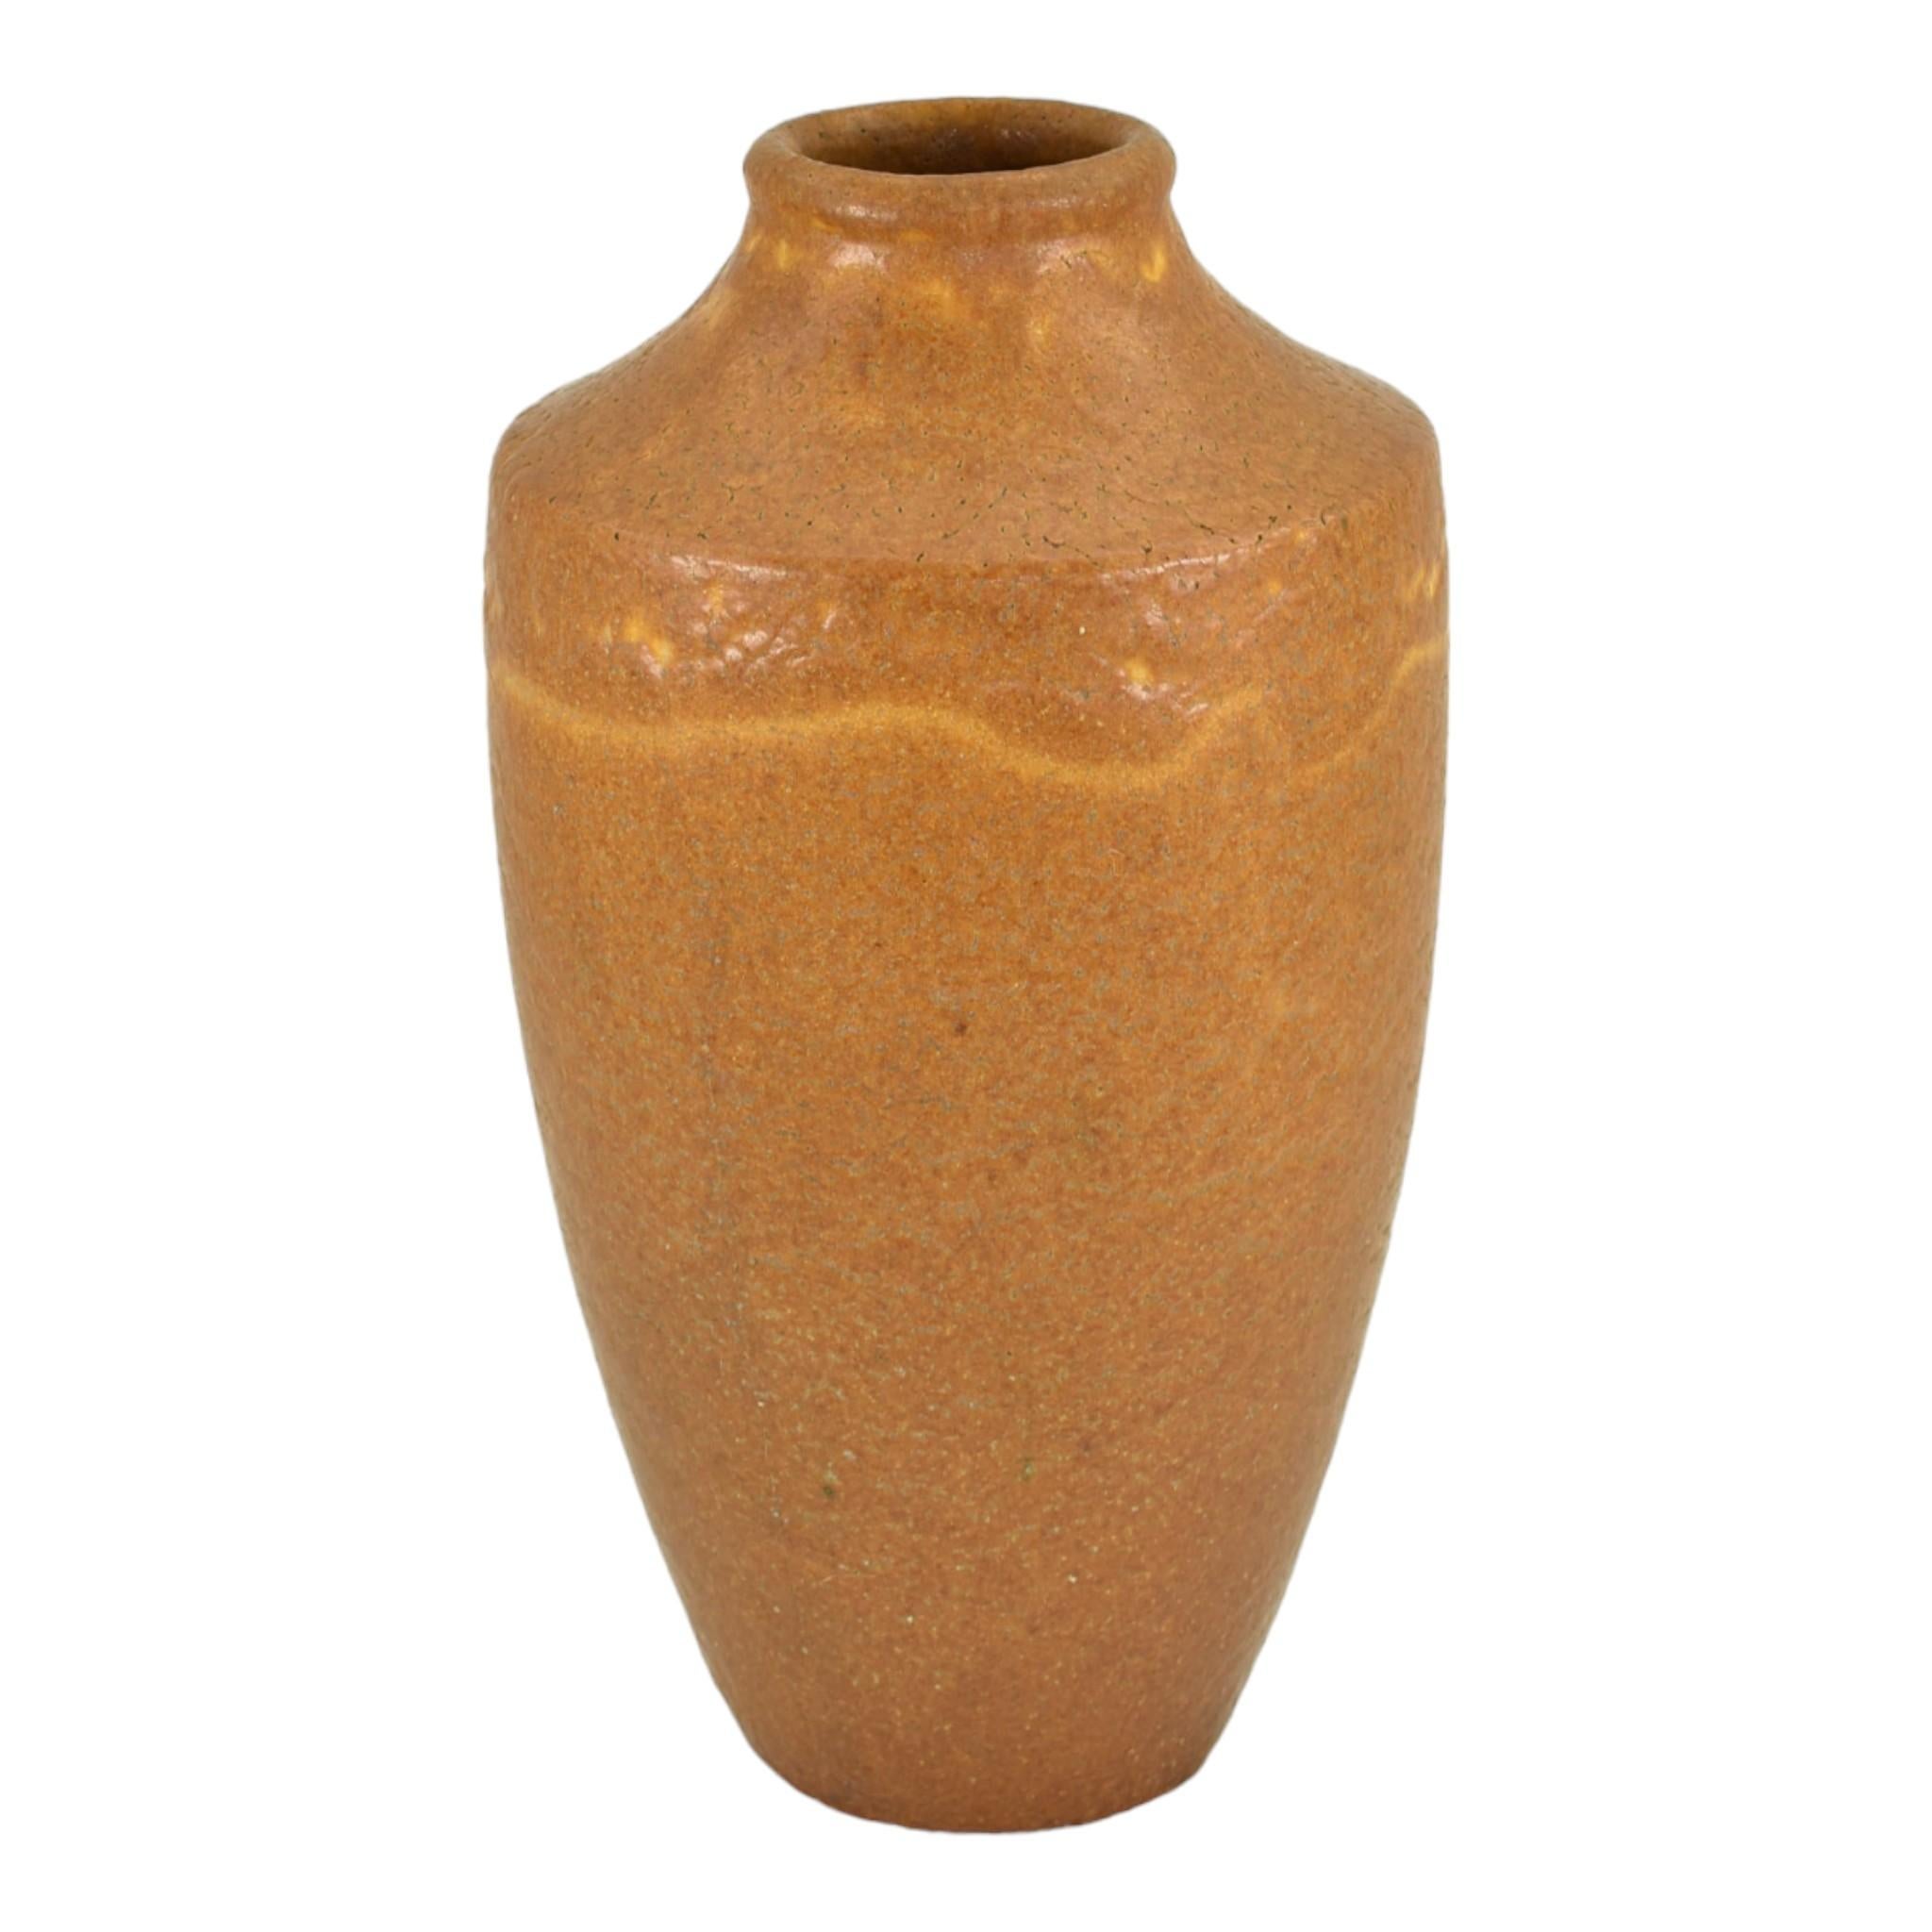 Grueby 1900s Vintage Arts and Crafts Pottery Organic Matte Brown Vase
Early and large arts and crafts Grueby vase covered in a wonderful organic matte caramel brown glaze. 
Excellent condition. There is an almost non-detectable mid body hairline